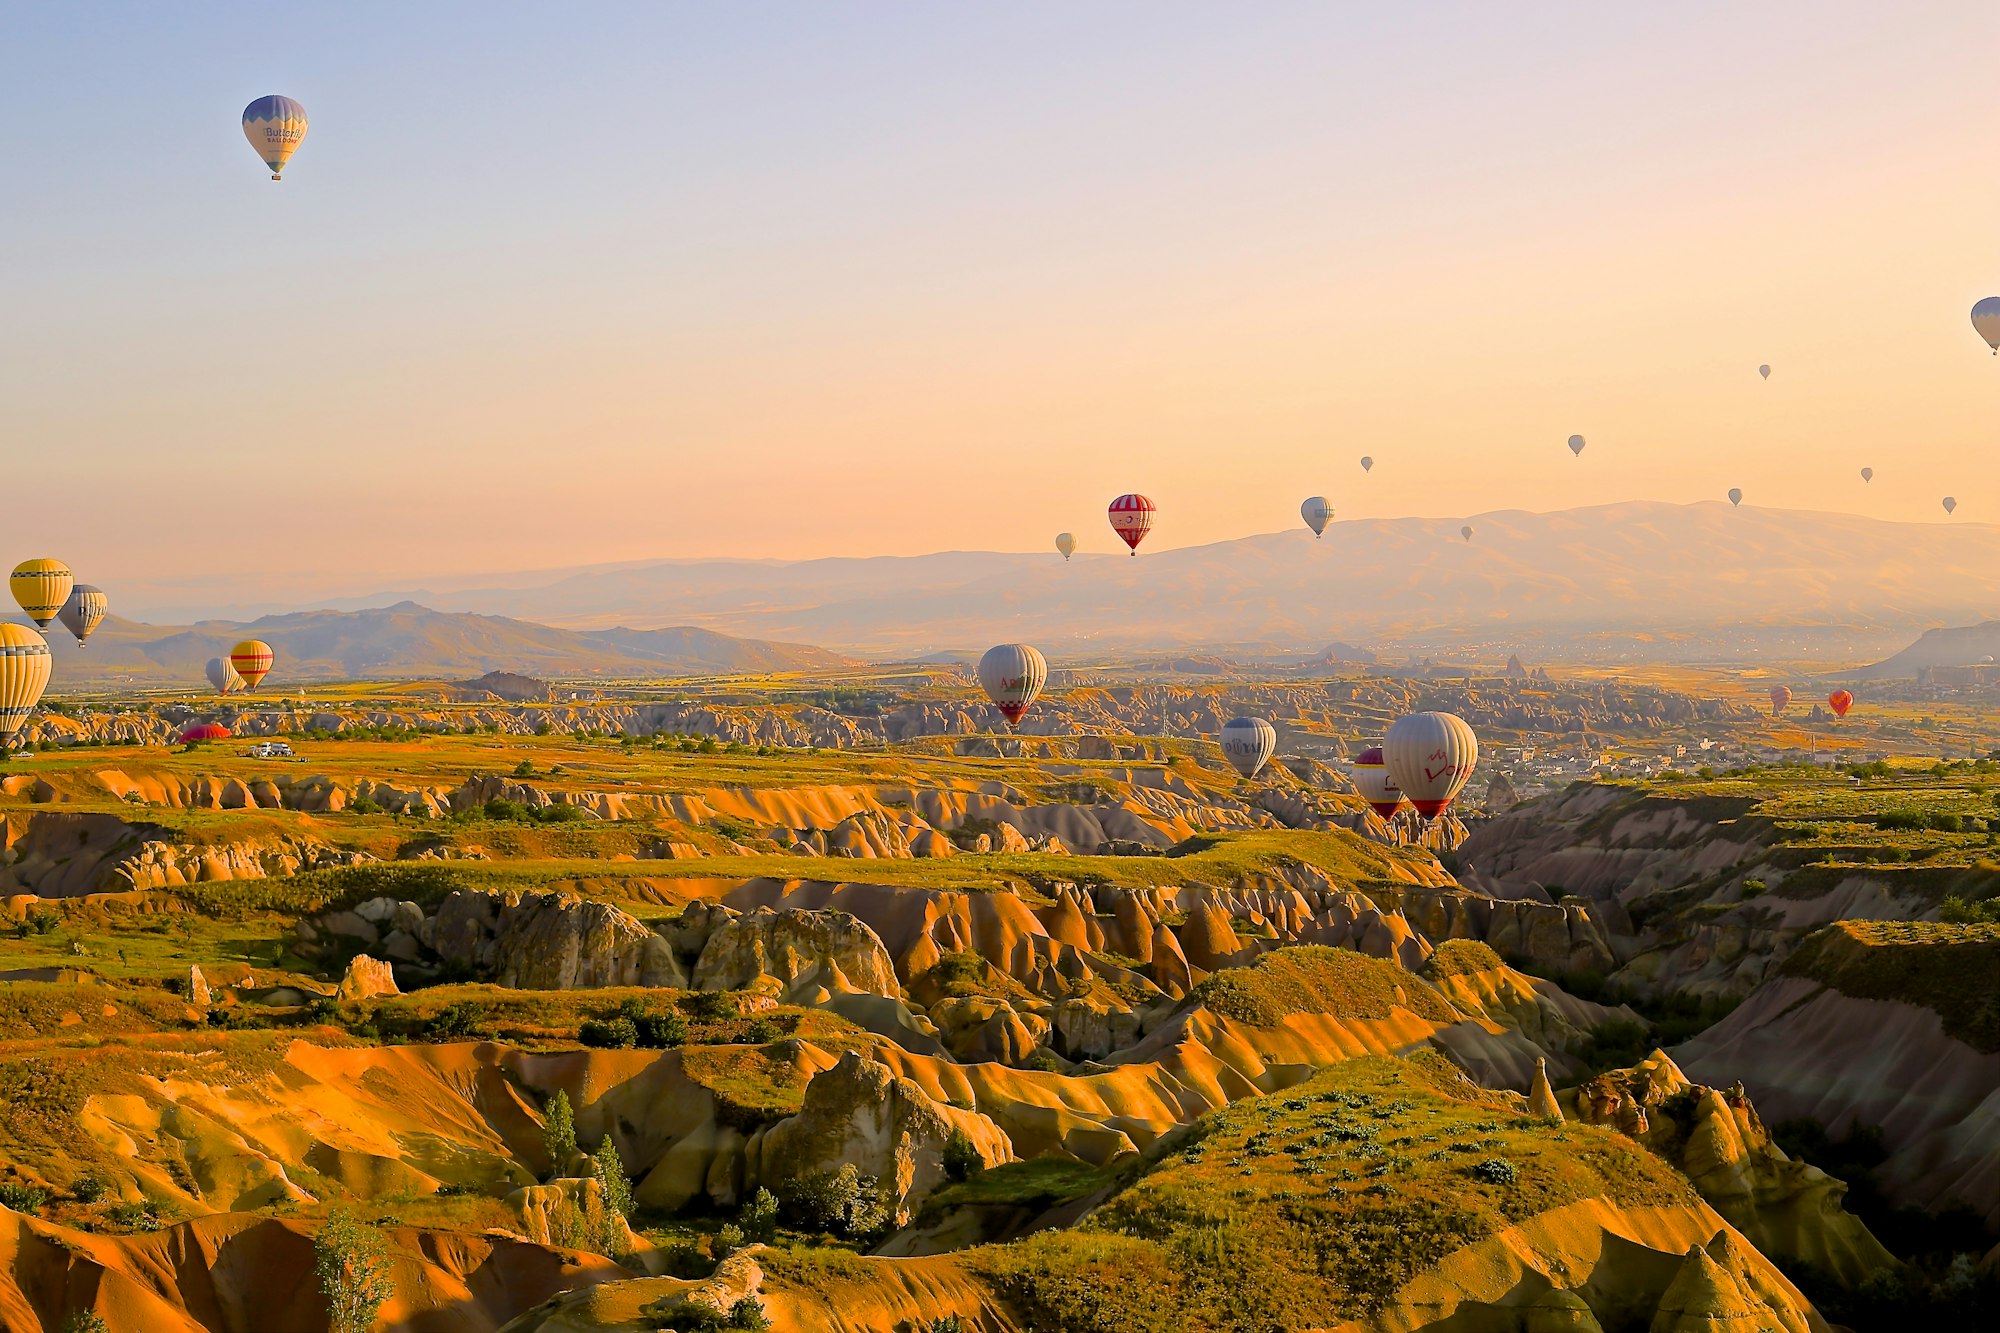 The hills of Cappadocia are a stunning sight